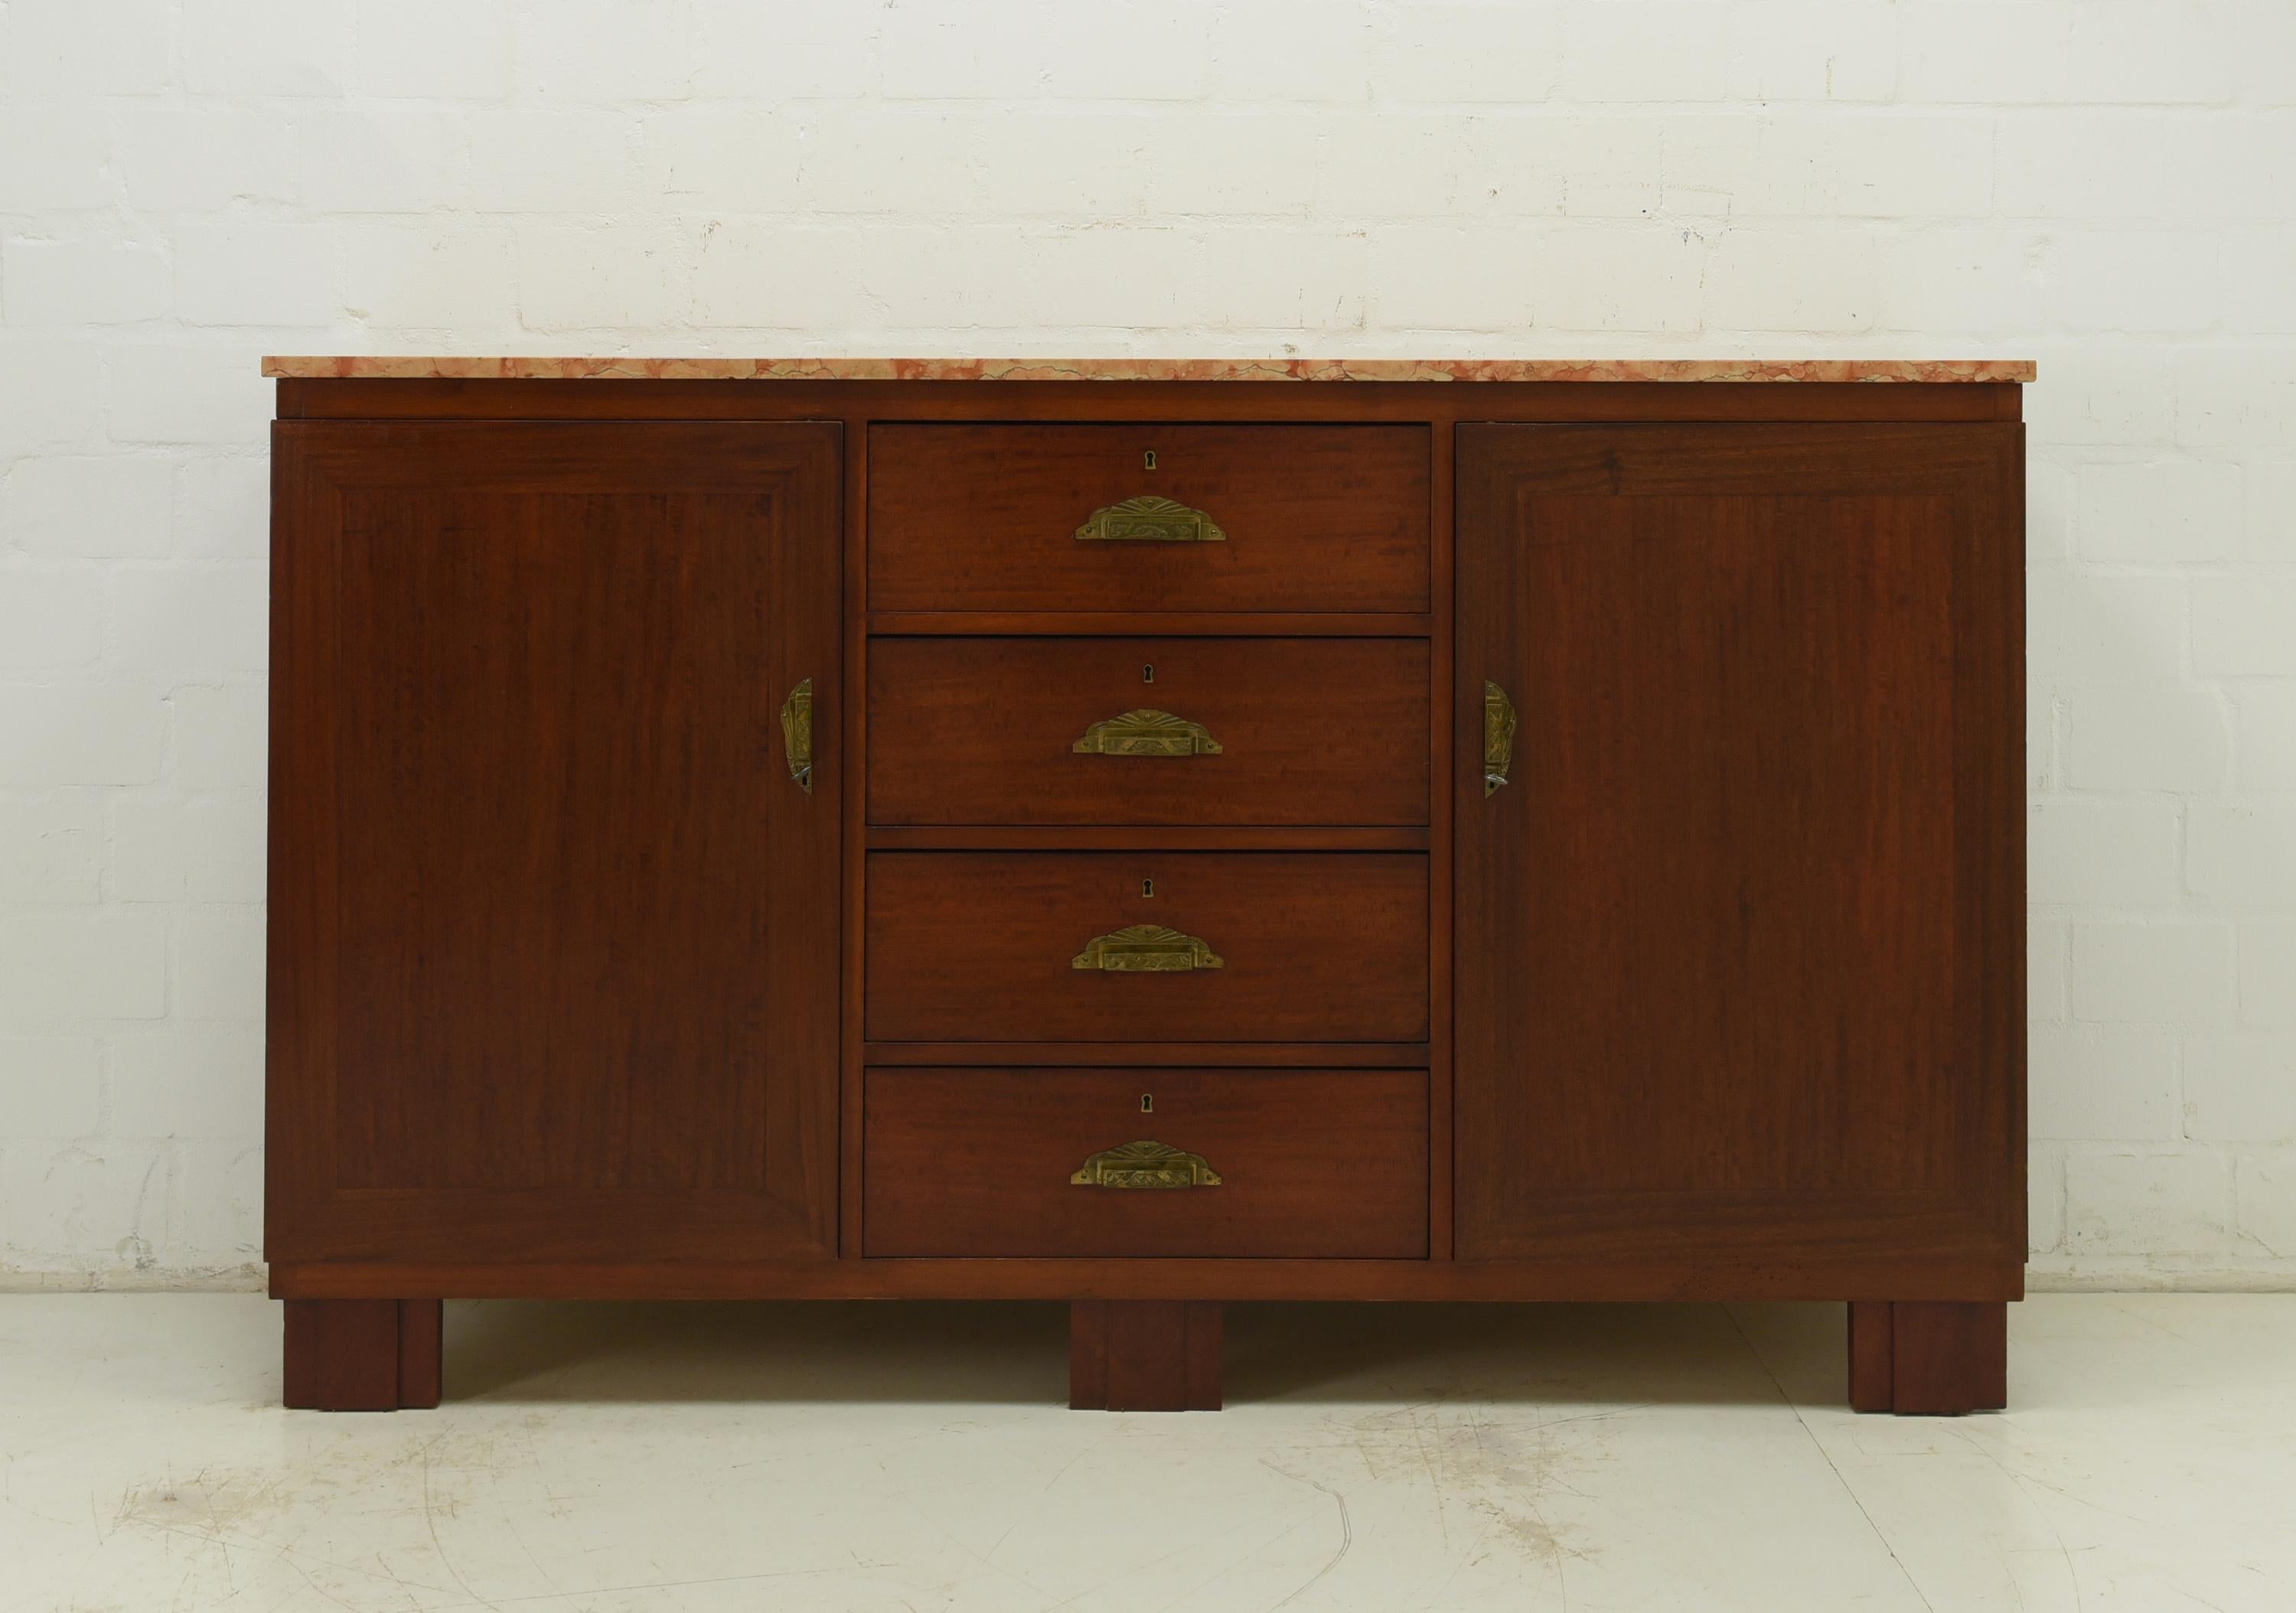 Sideboard restored Art Deco circa 1925 mahogany long sideboard

Features:
Inside partly solid oak, partly plywood
Two-door model with 4 drawers
Drawers pronged
Original rose marble top
Original rod locks
High-quality original Art Deco